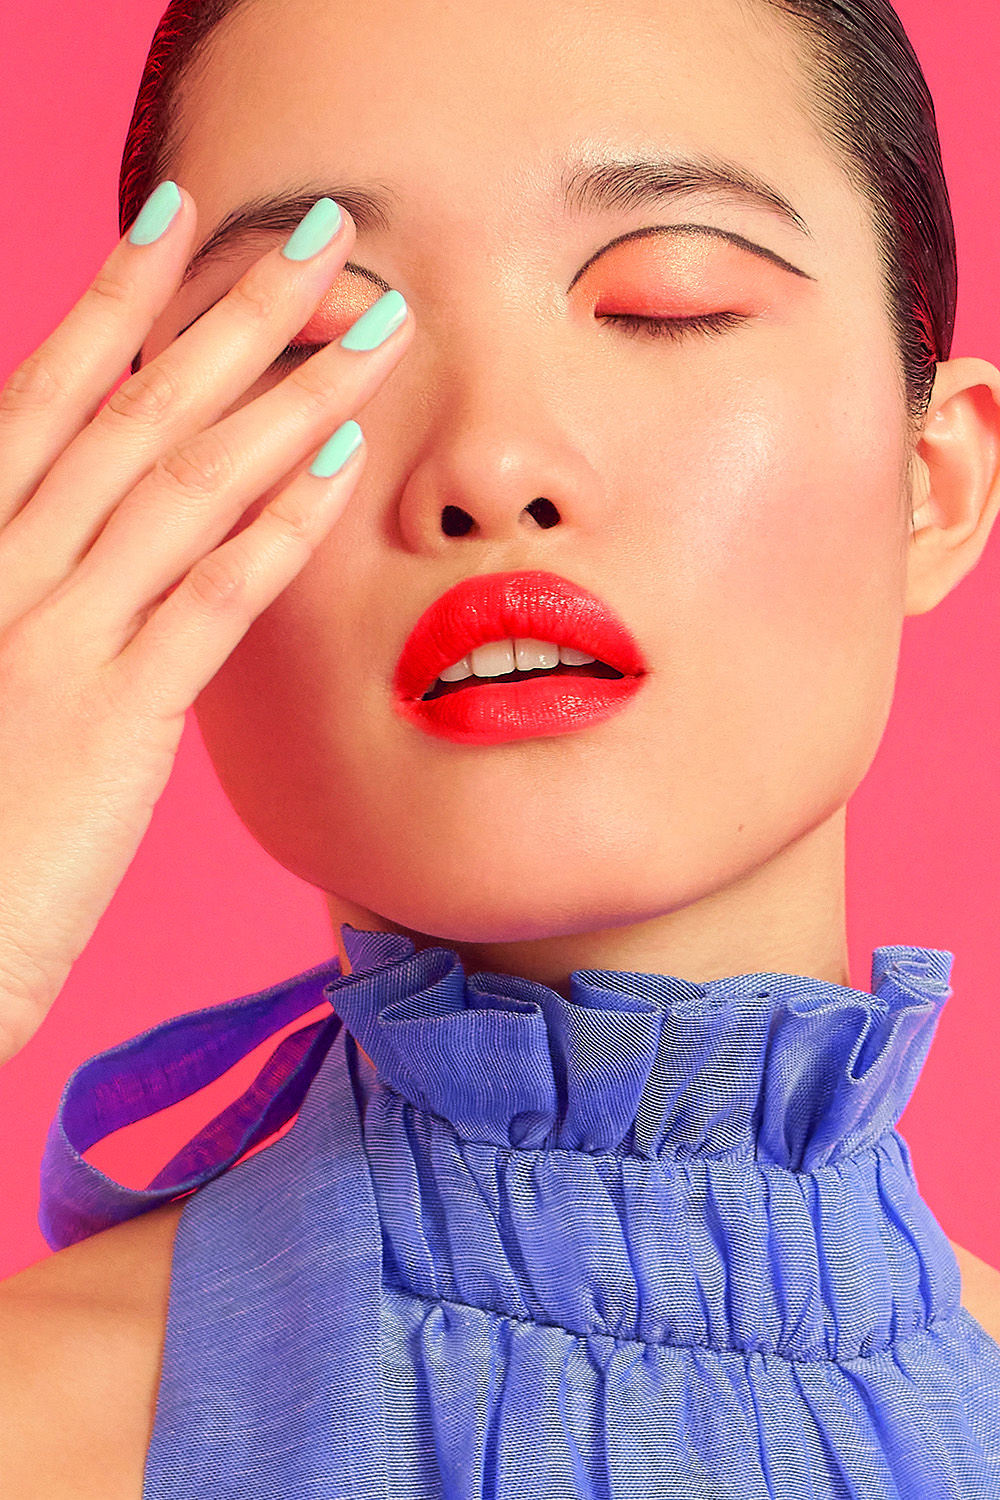 5 S/S 2020 Beauty Trends We'll See Everywhere Next Year